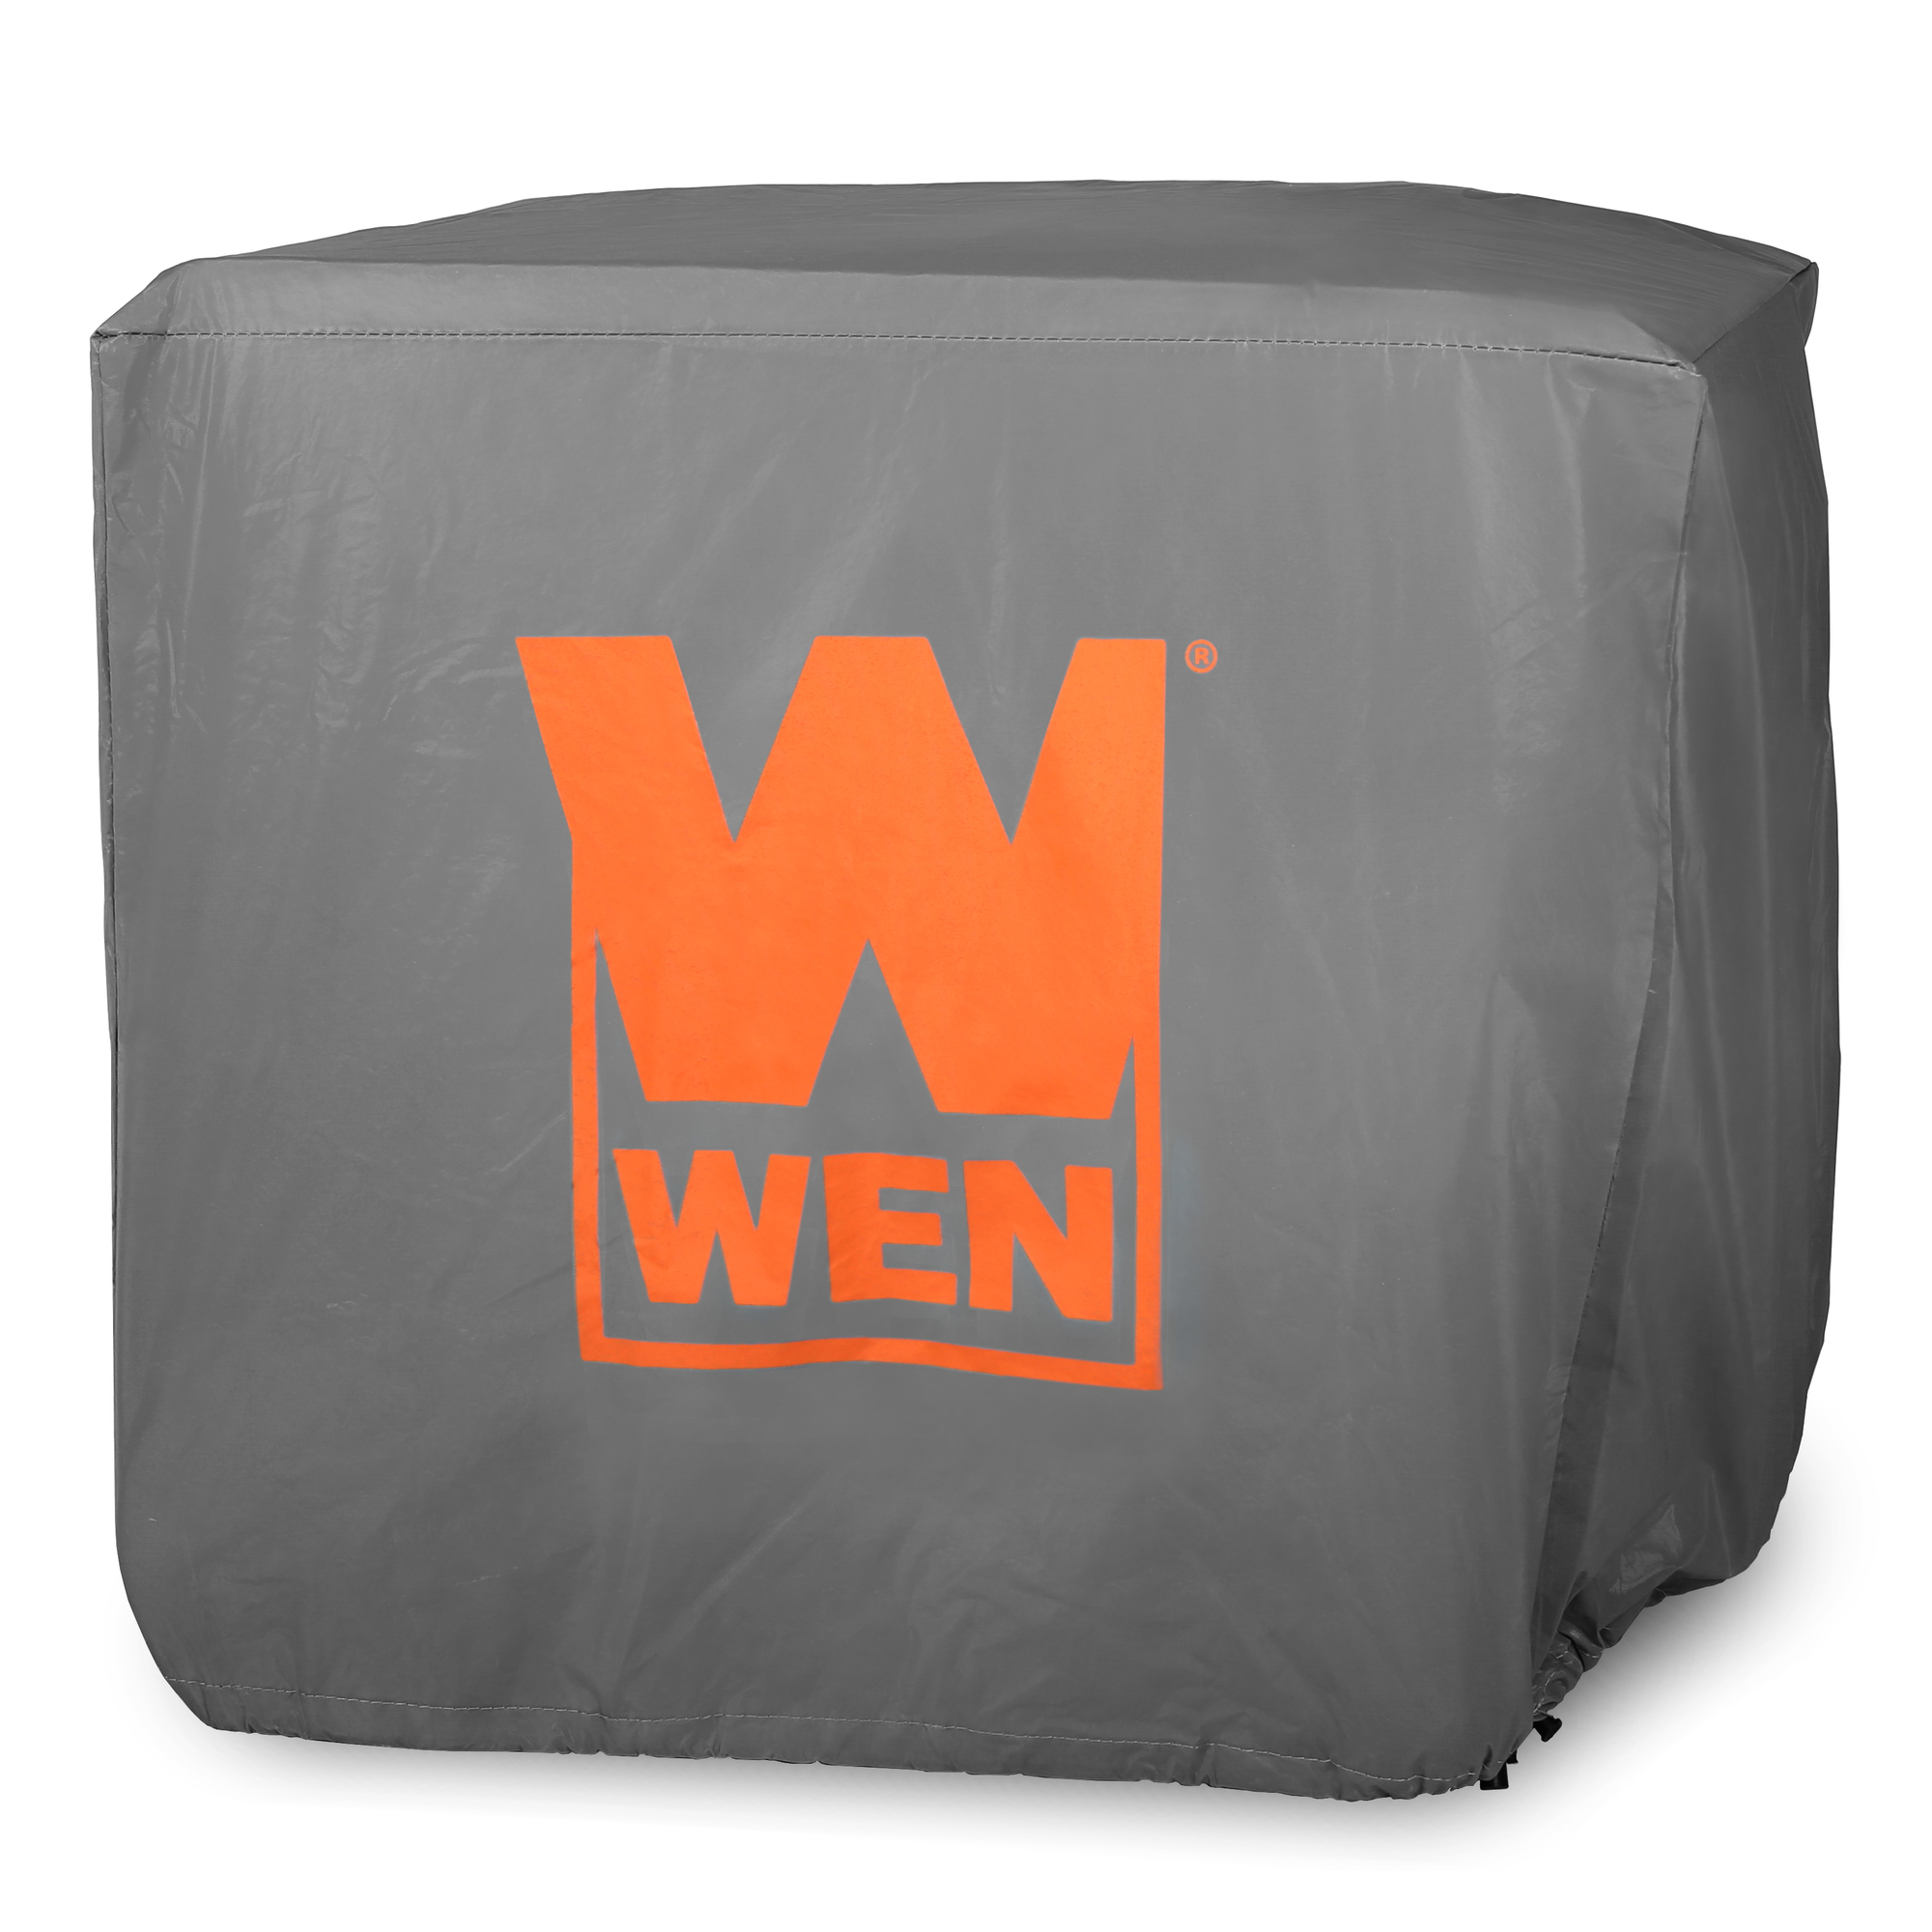 WEN, Weatherproof Generator Cover, Material Vinyl, Closure Type Other, Compatible With Other, Model GNC400